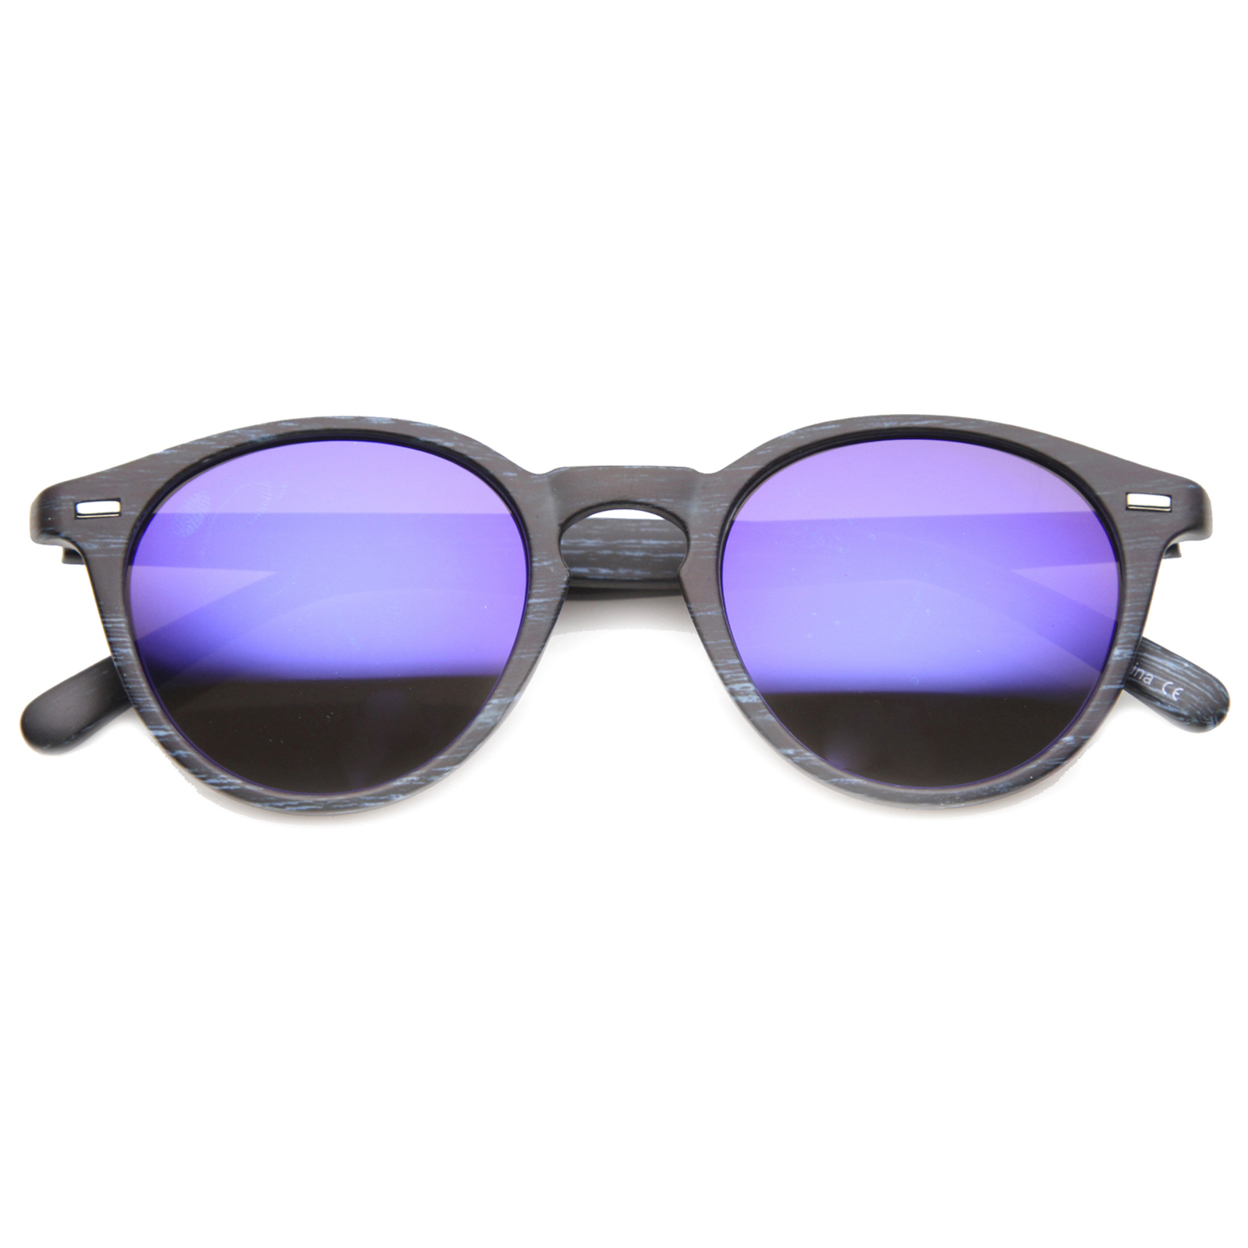 Mens Horn Rimmed Sunglasses With UV400 Protected Mirrored Lens 9812 - Black-Blue-Wood / Violet